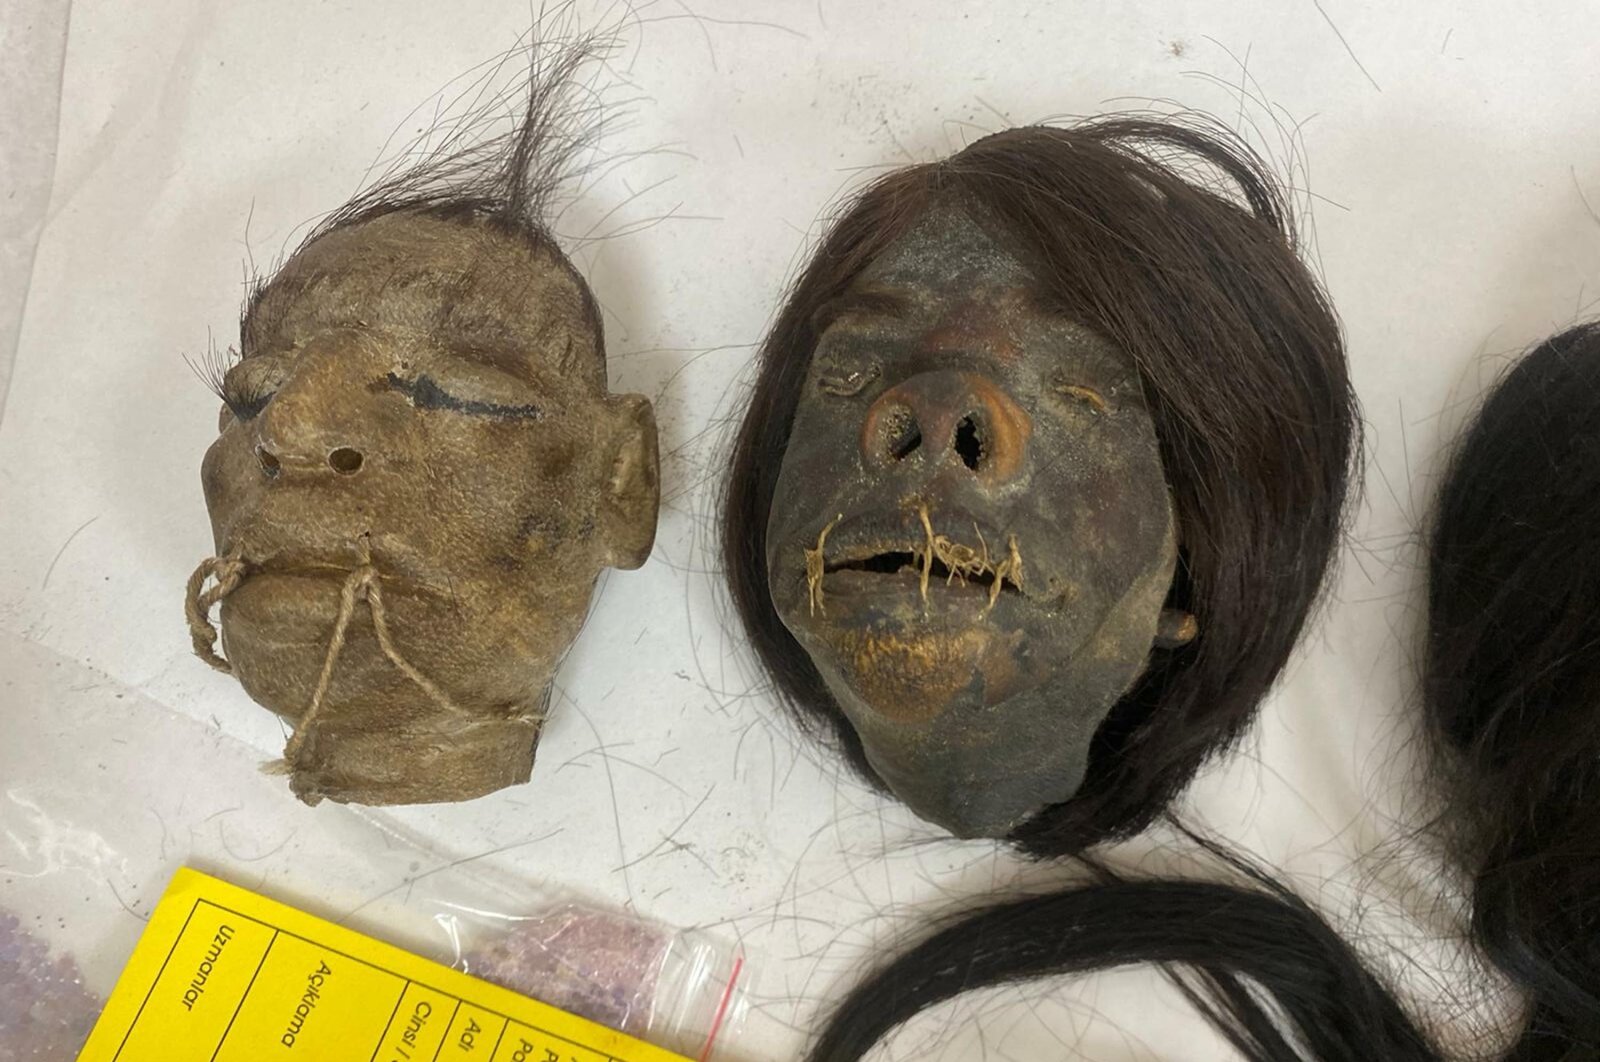 "Tsantas," or "shrunken" heads, believed to be from Peru and confiscated by authorities in December 2021 are cataloged in a police station in, Izmir, Turkey, May 20, 2022. (AA Photo)